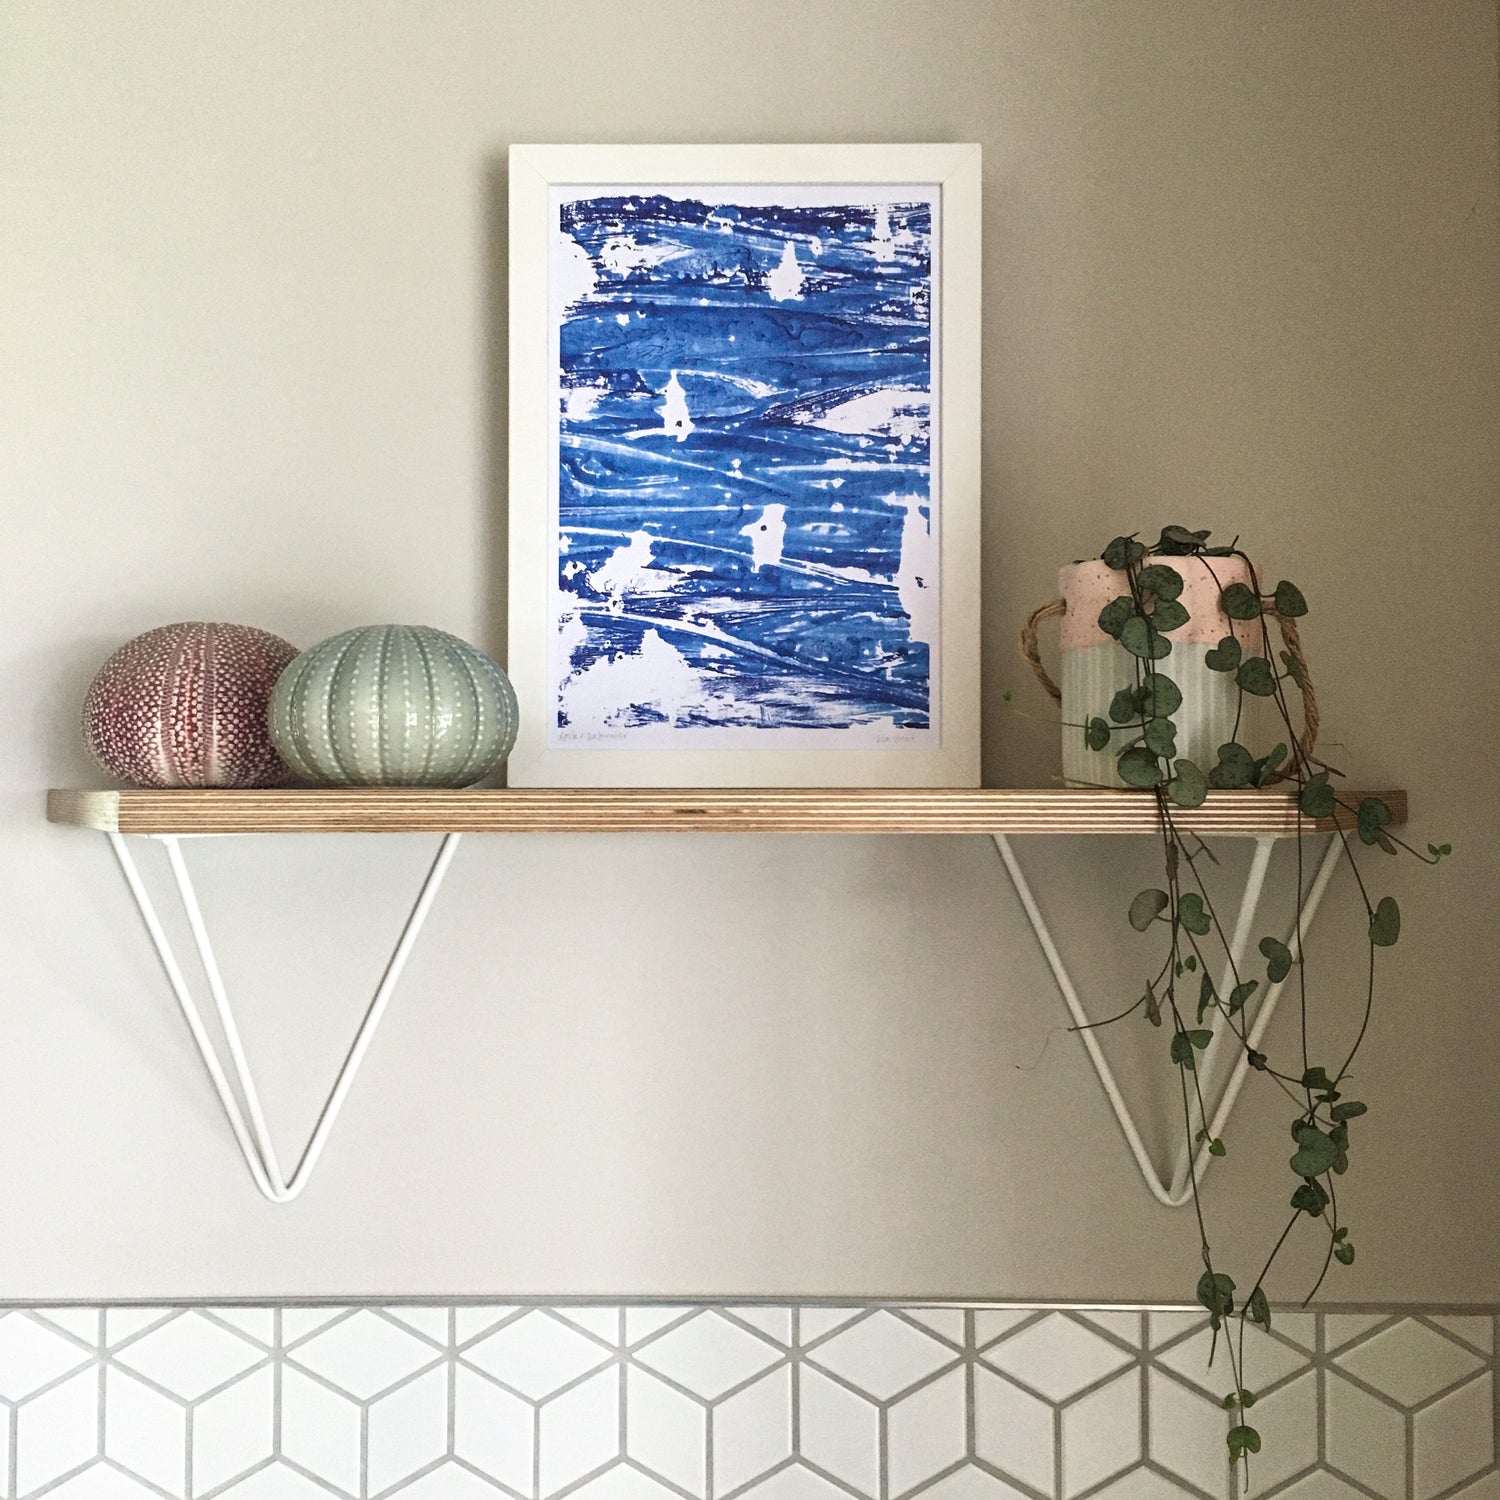 Wall with a birch ply and angled hairpin bracket shelf. On the shelf it a framed 'sea print' art print, two sea urchins (one ceramic) and a string of hearts plant in a ceramic pot. The wall is painted light grey with white geometric tiles below. 